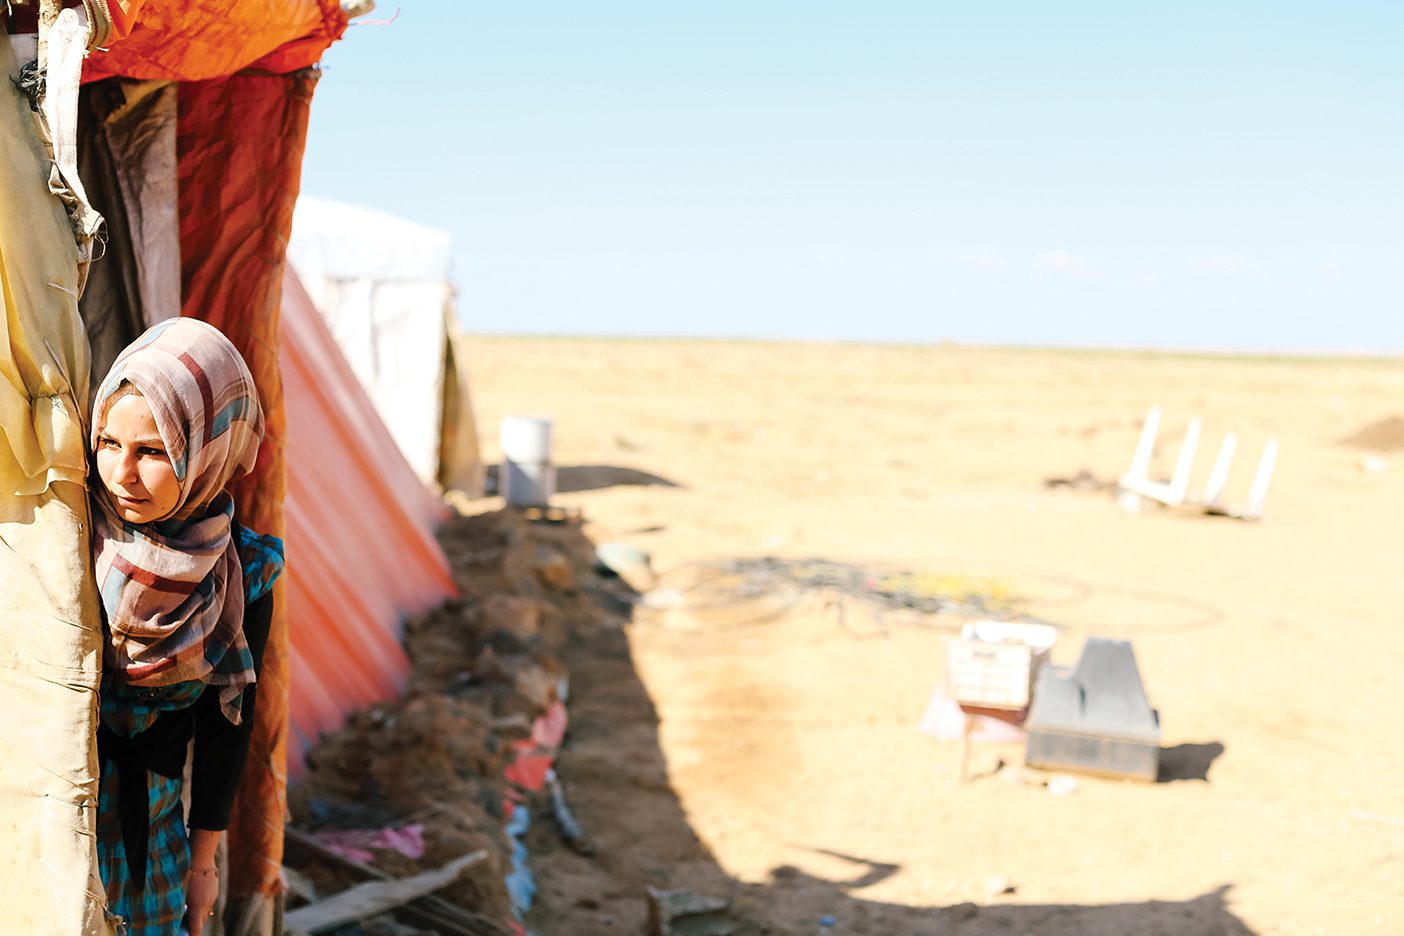 A Syrian refugee woman is looking out from her tent in the Jordanian desert.